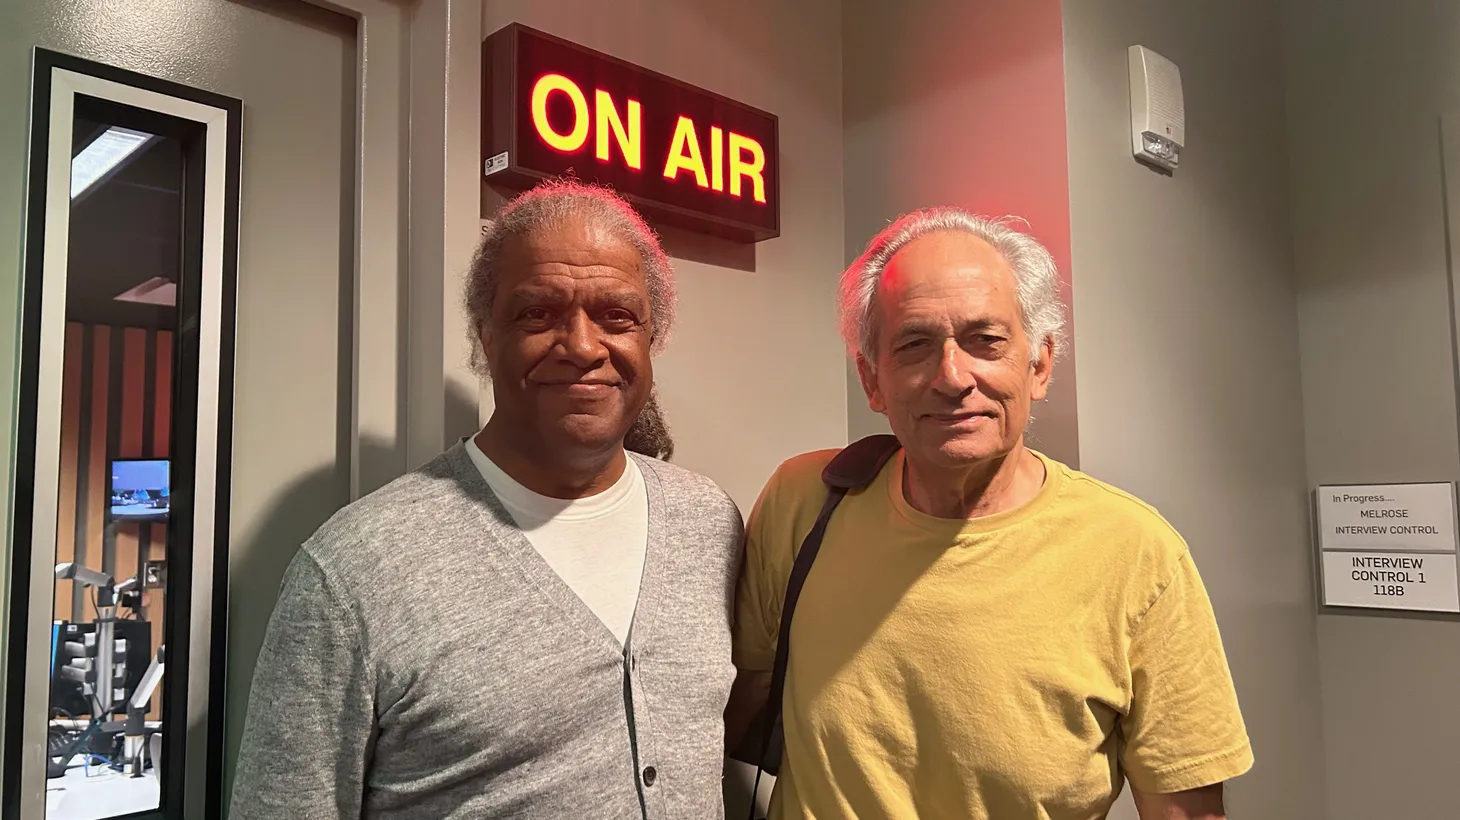 Elvis Mitchell and Stephen Ujlaki at KCRW.